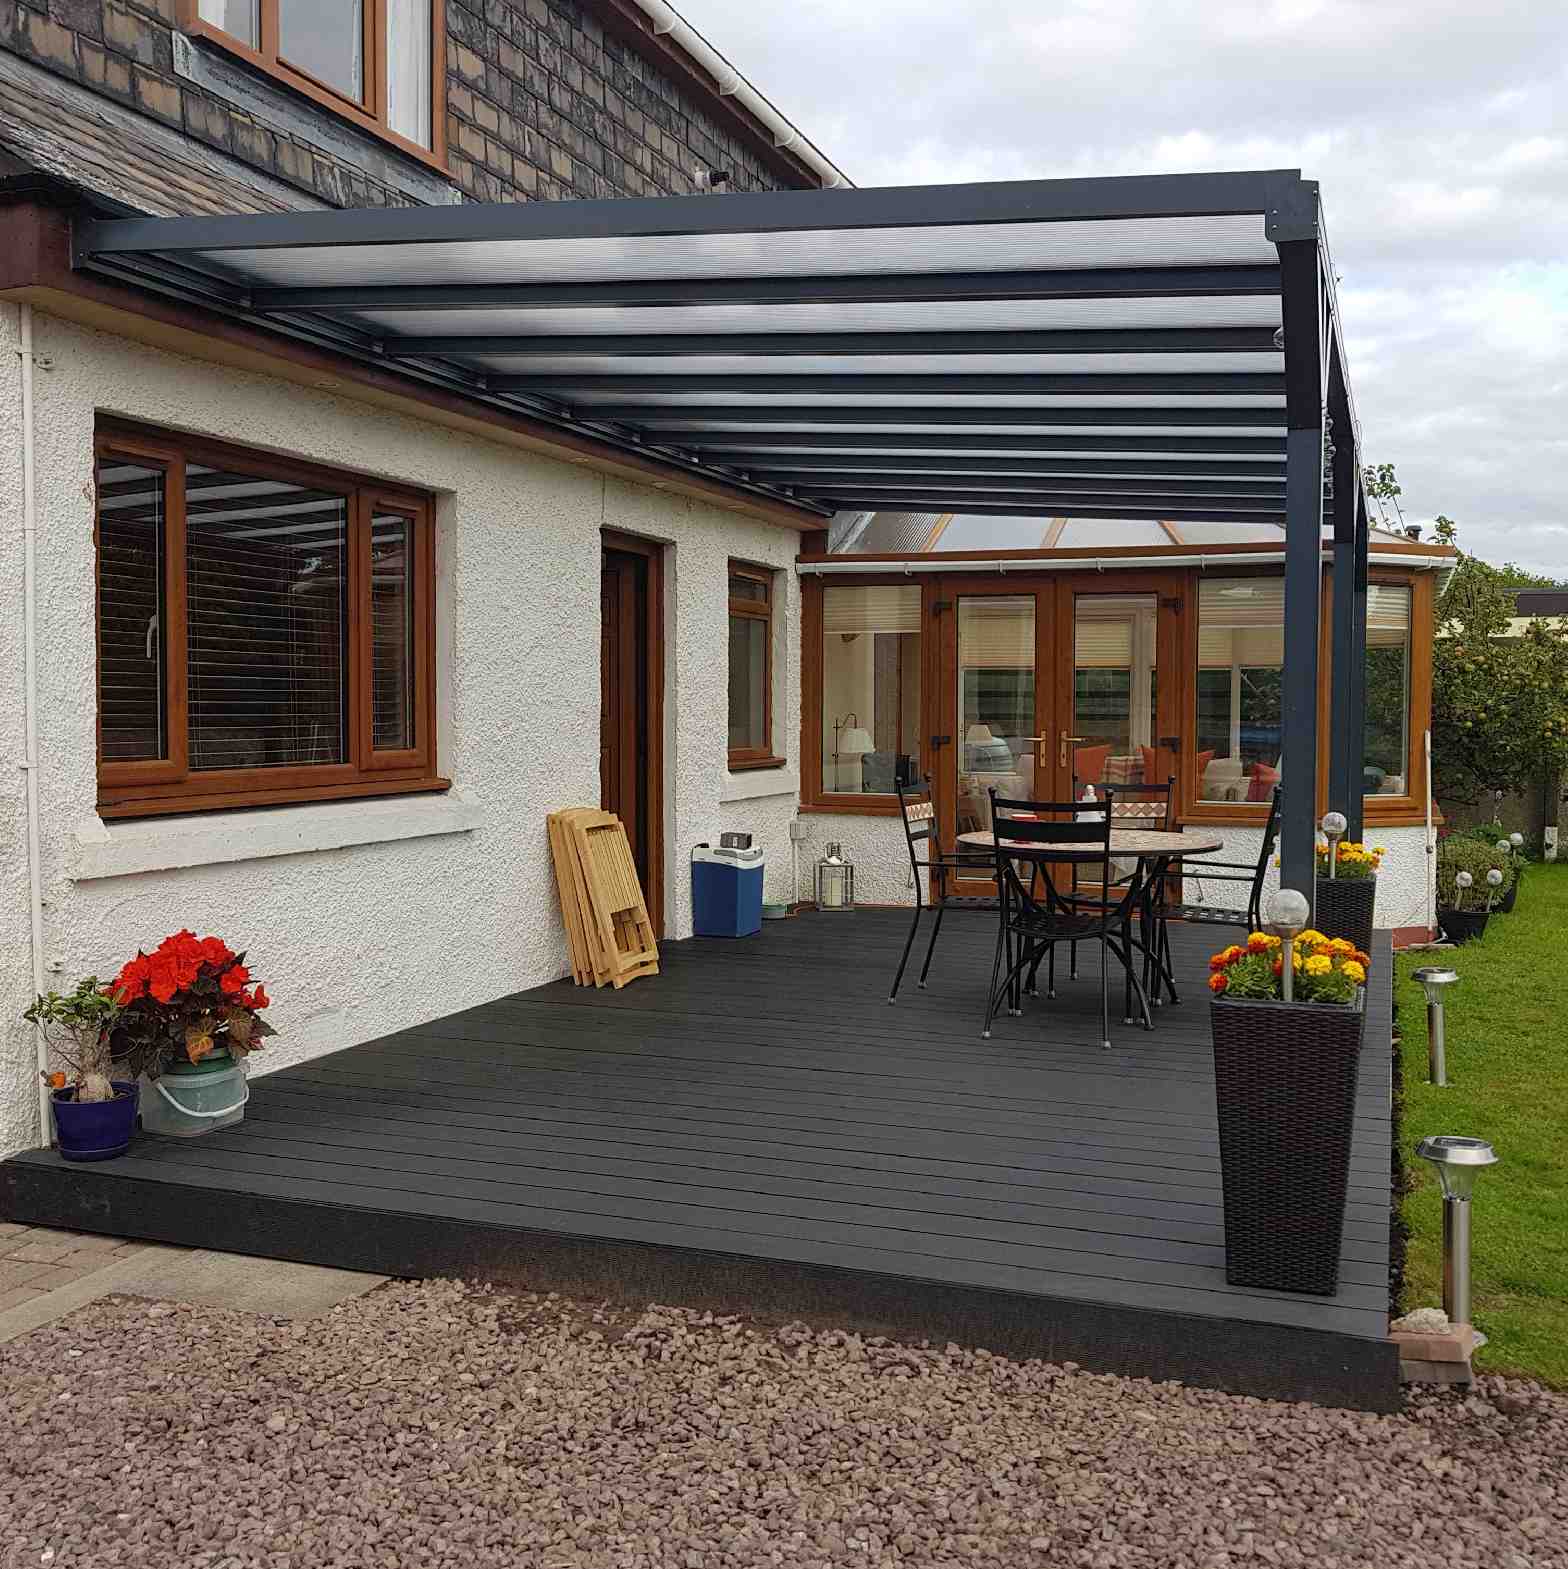 Buy Omega Verandah, Anthracite Grey, 16mm Polycarbonate Glazing - 6.3m (W) x 3.0m (P), (4) Supporting Posts online today